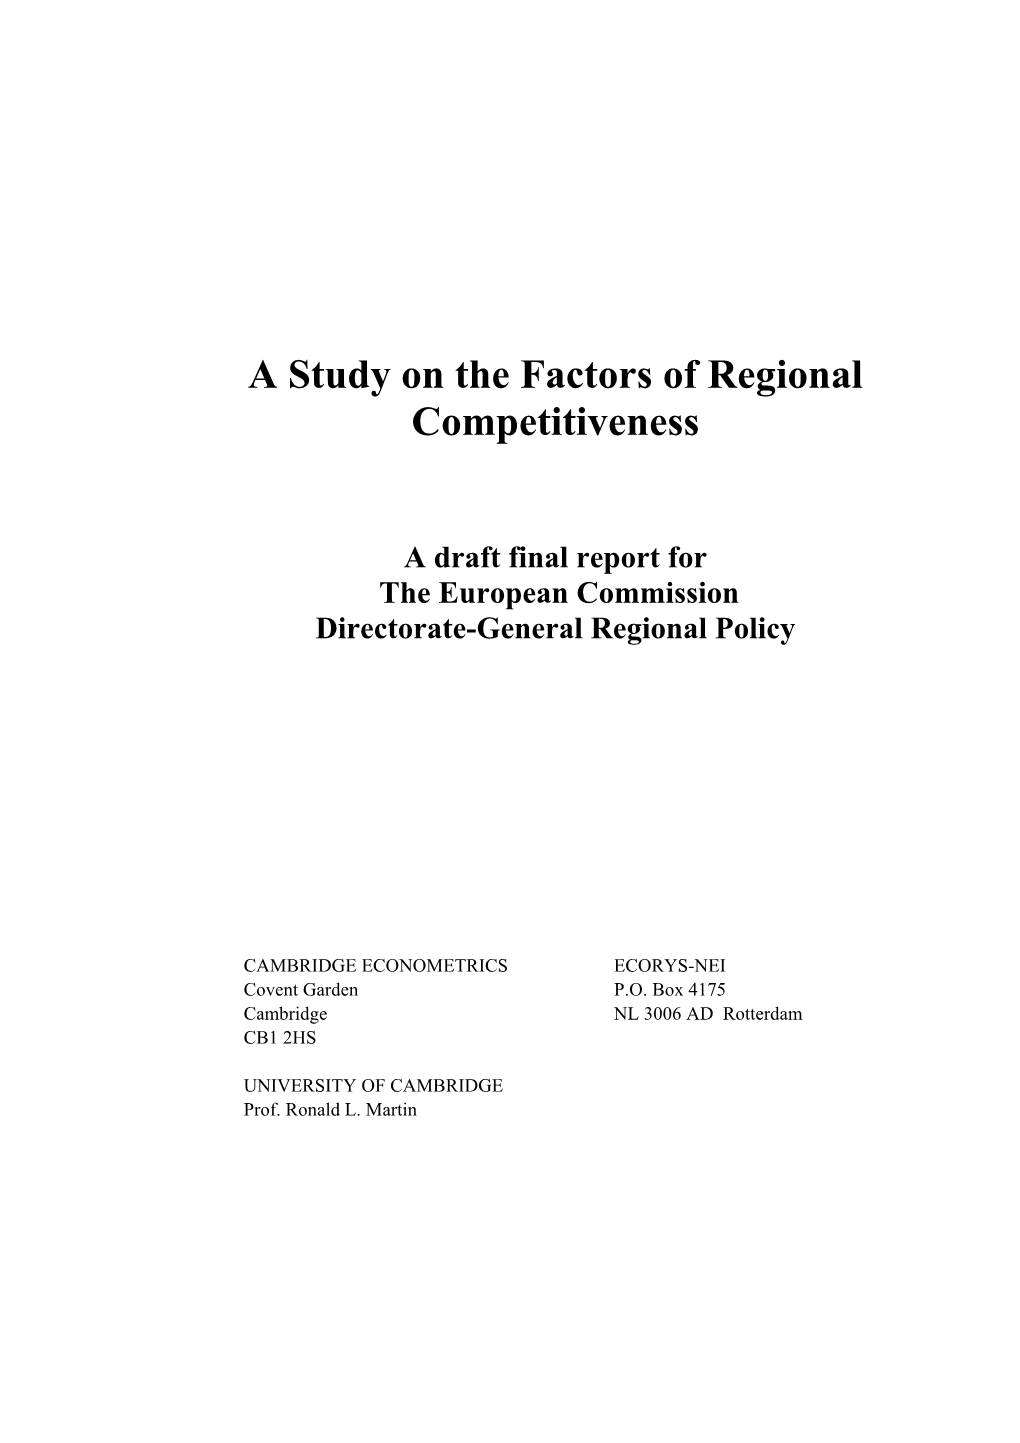 A Study on the Factors of Regional Competitiveness